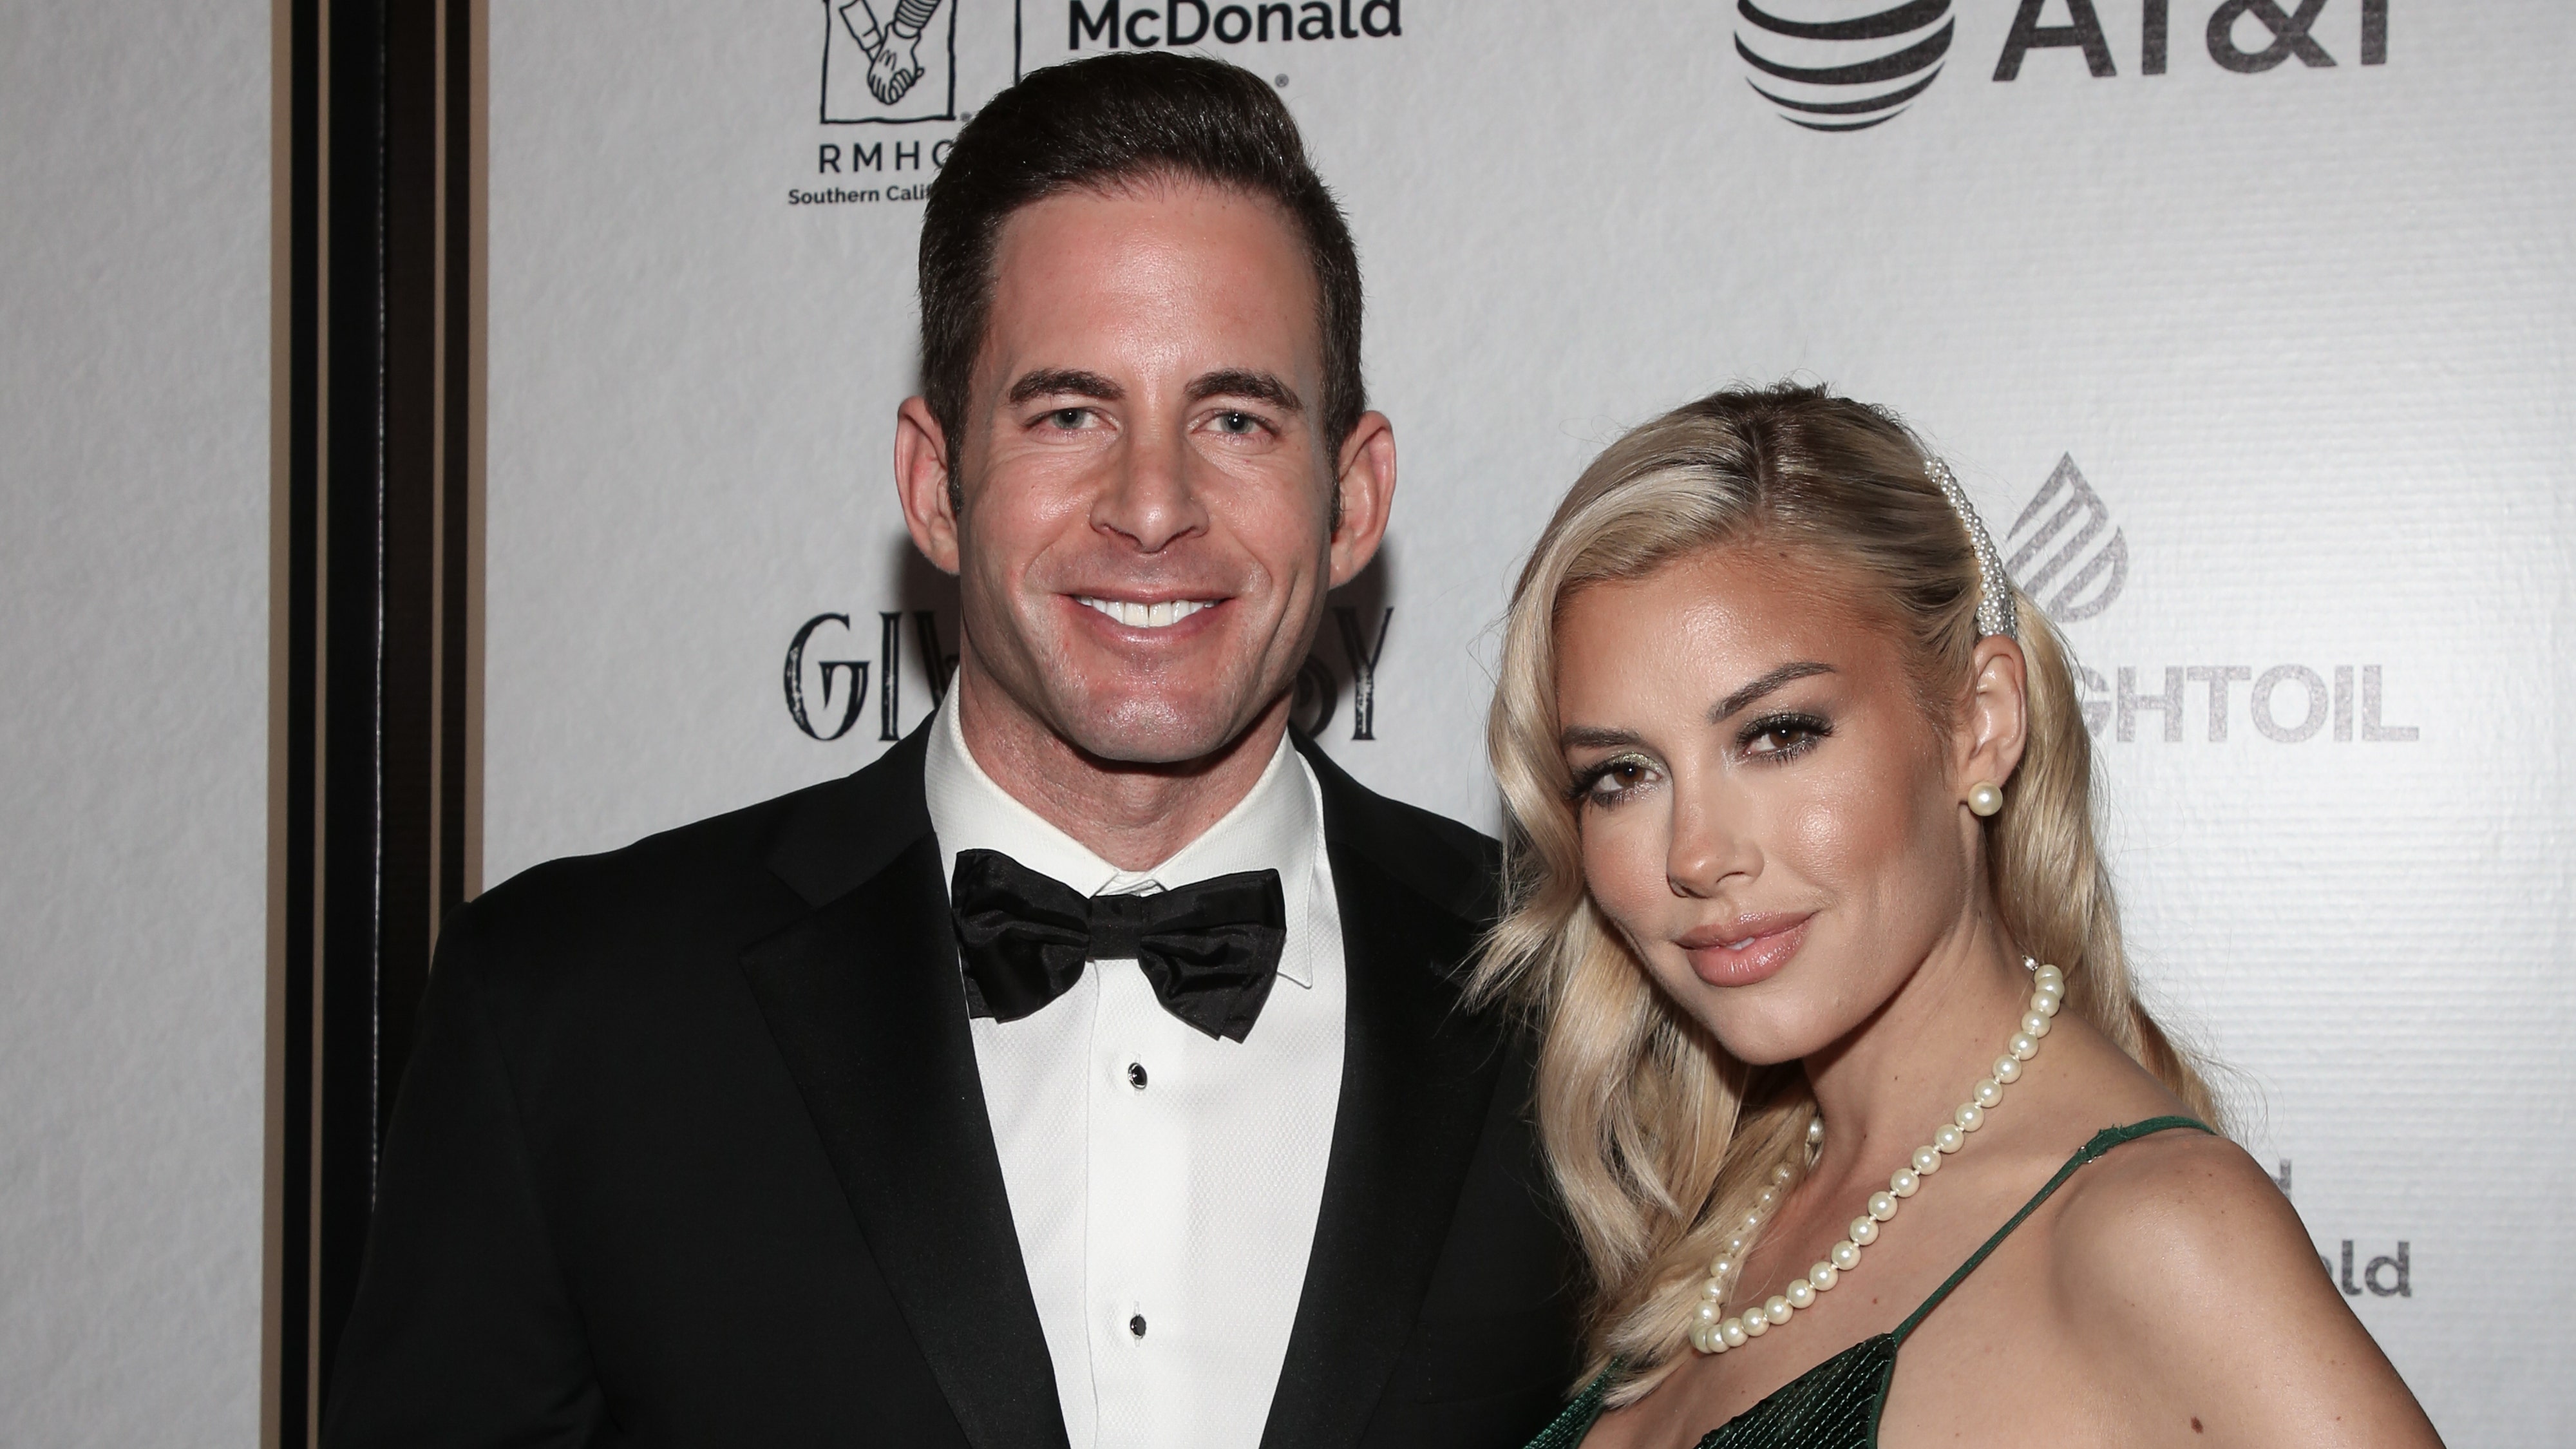 Tarek El Moussa shares an impressive throwback photo with fiancee Heather Rae Young: ‘Good things are coming’